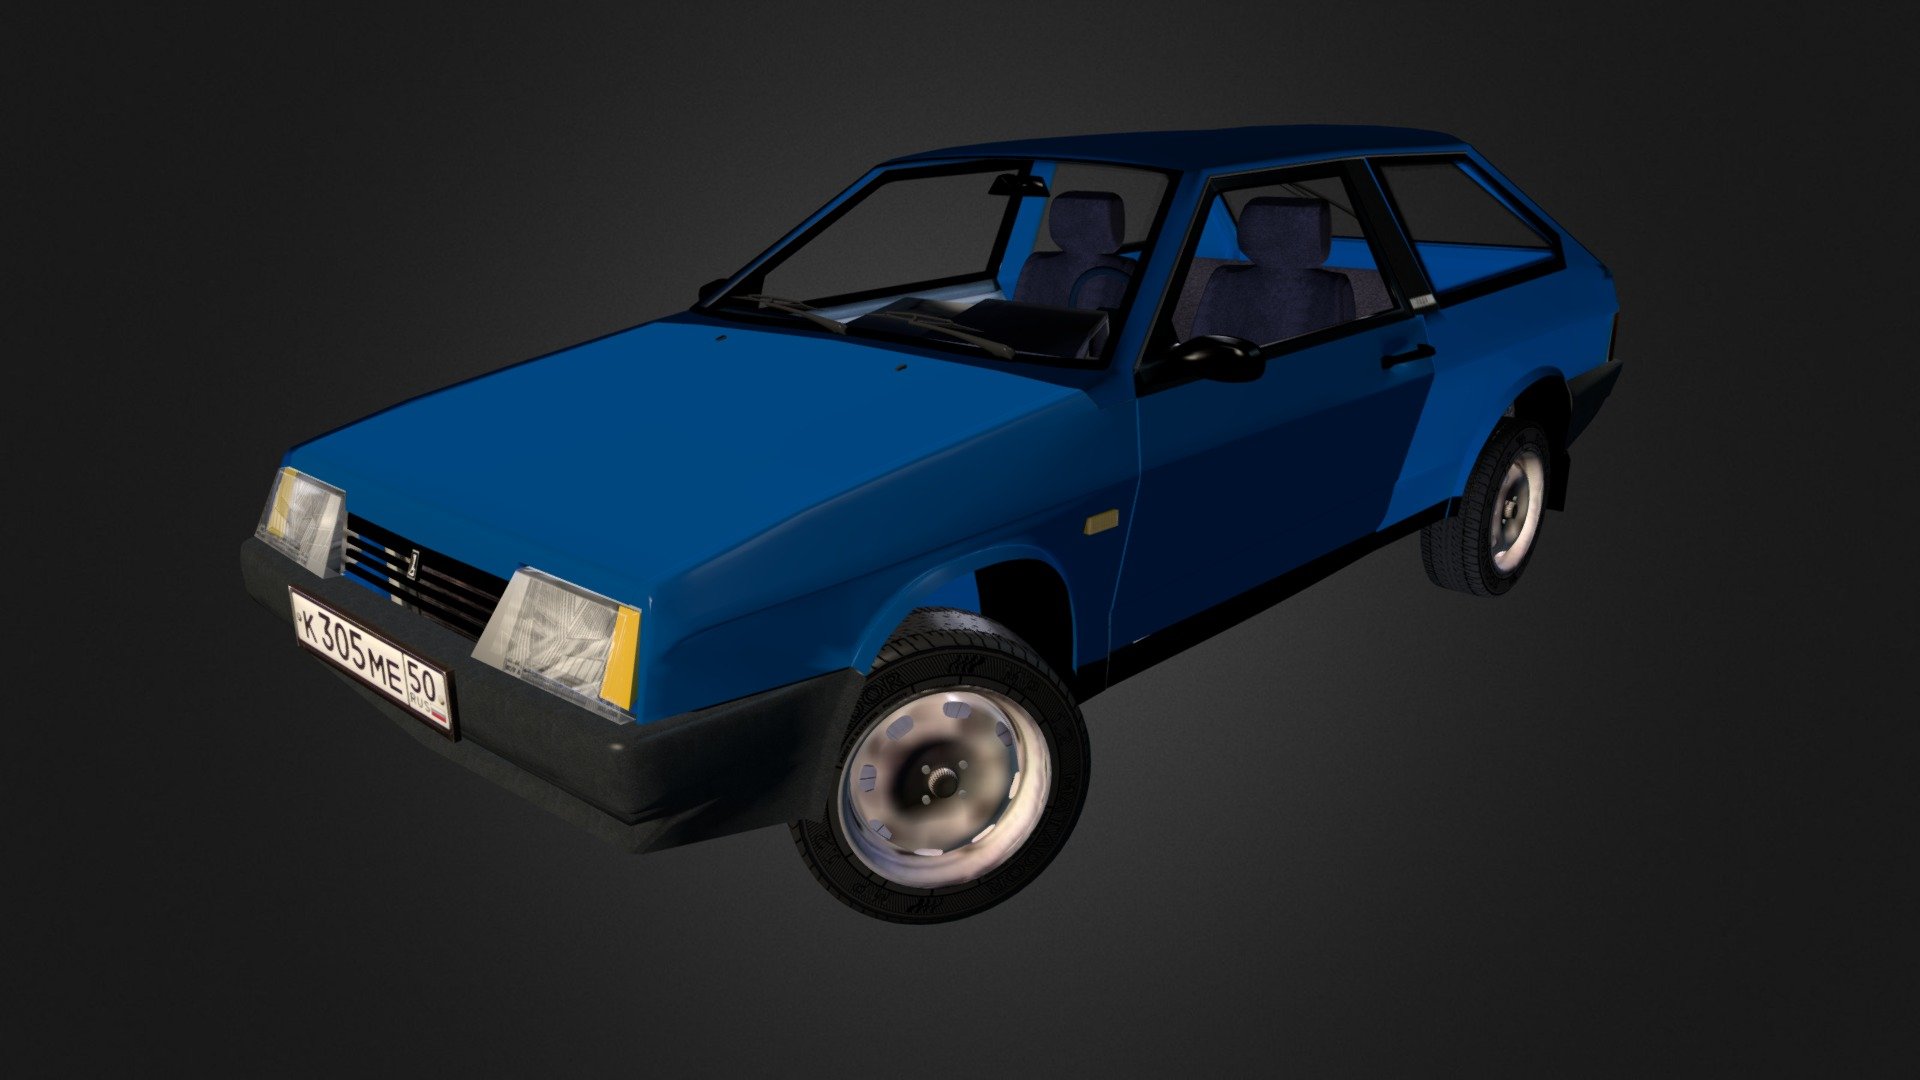 Low-poly model of the russian car You can buy it here -link removed- or here -link removed- - VAZ 2108 - 3D model by Pavel Shabanov (@coolerinc) 3d model